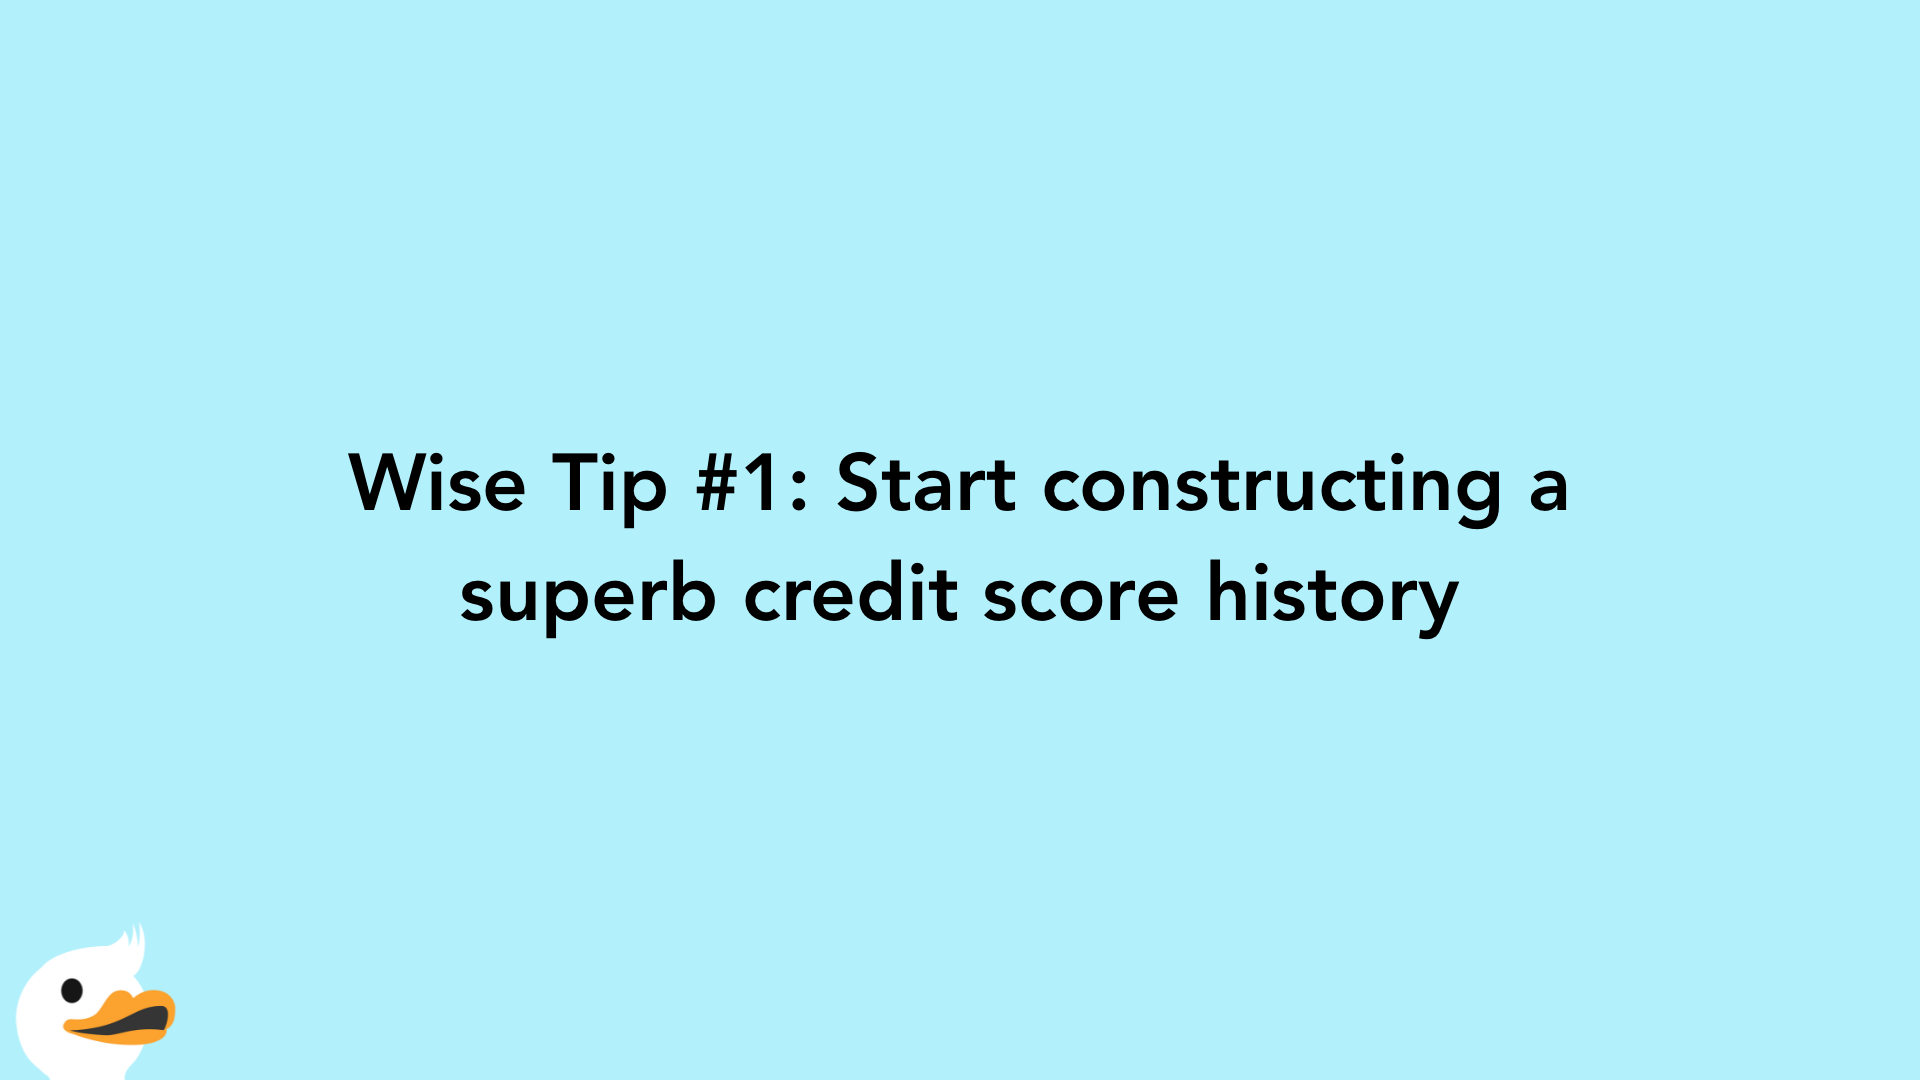 Wise Tip #1: Start constructing a superb credit score history